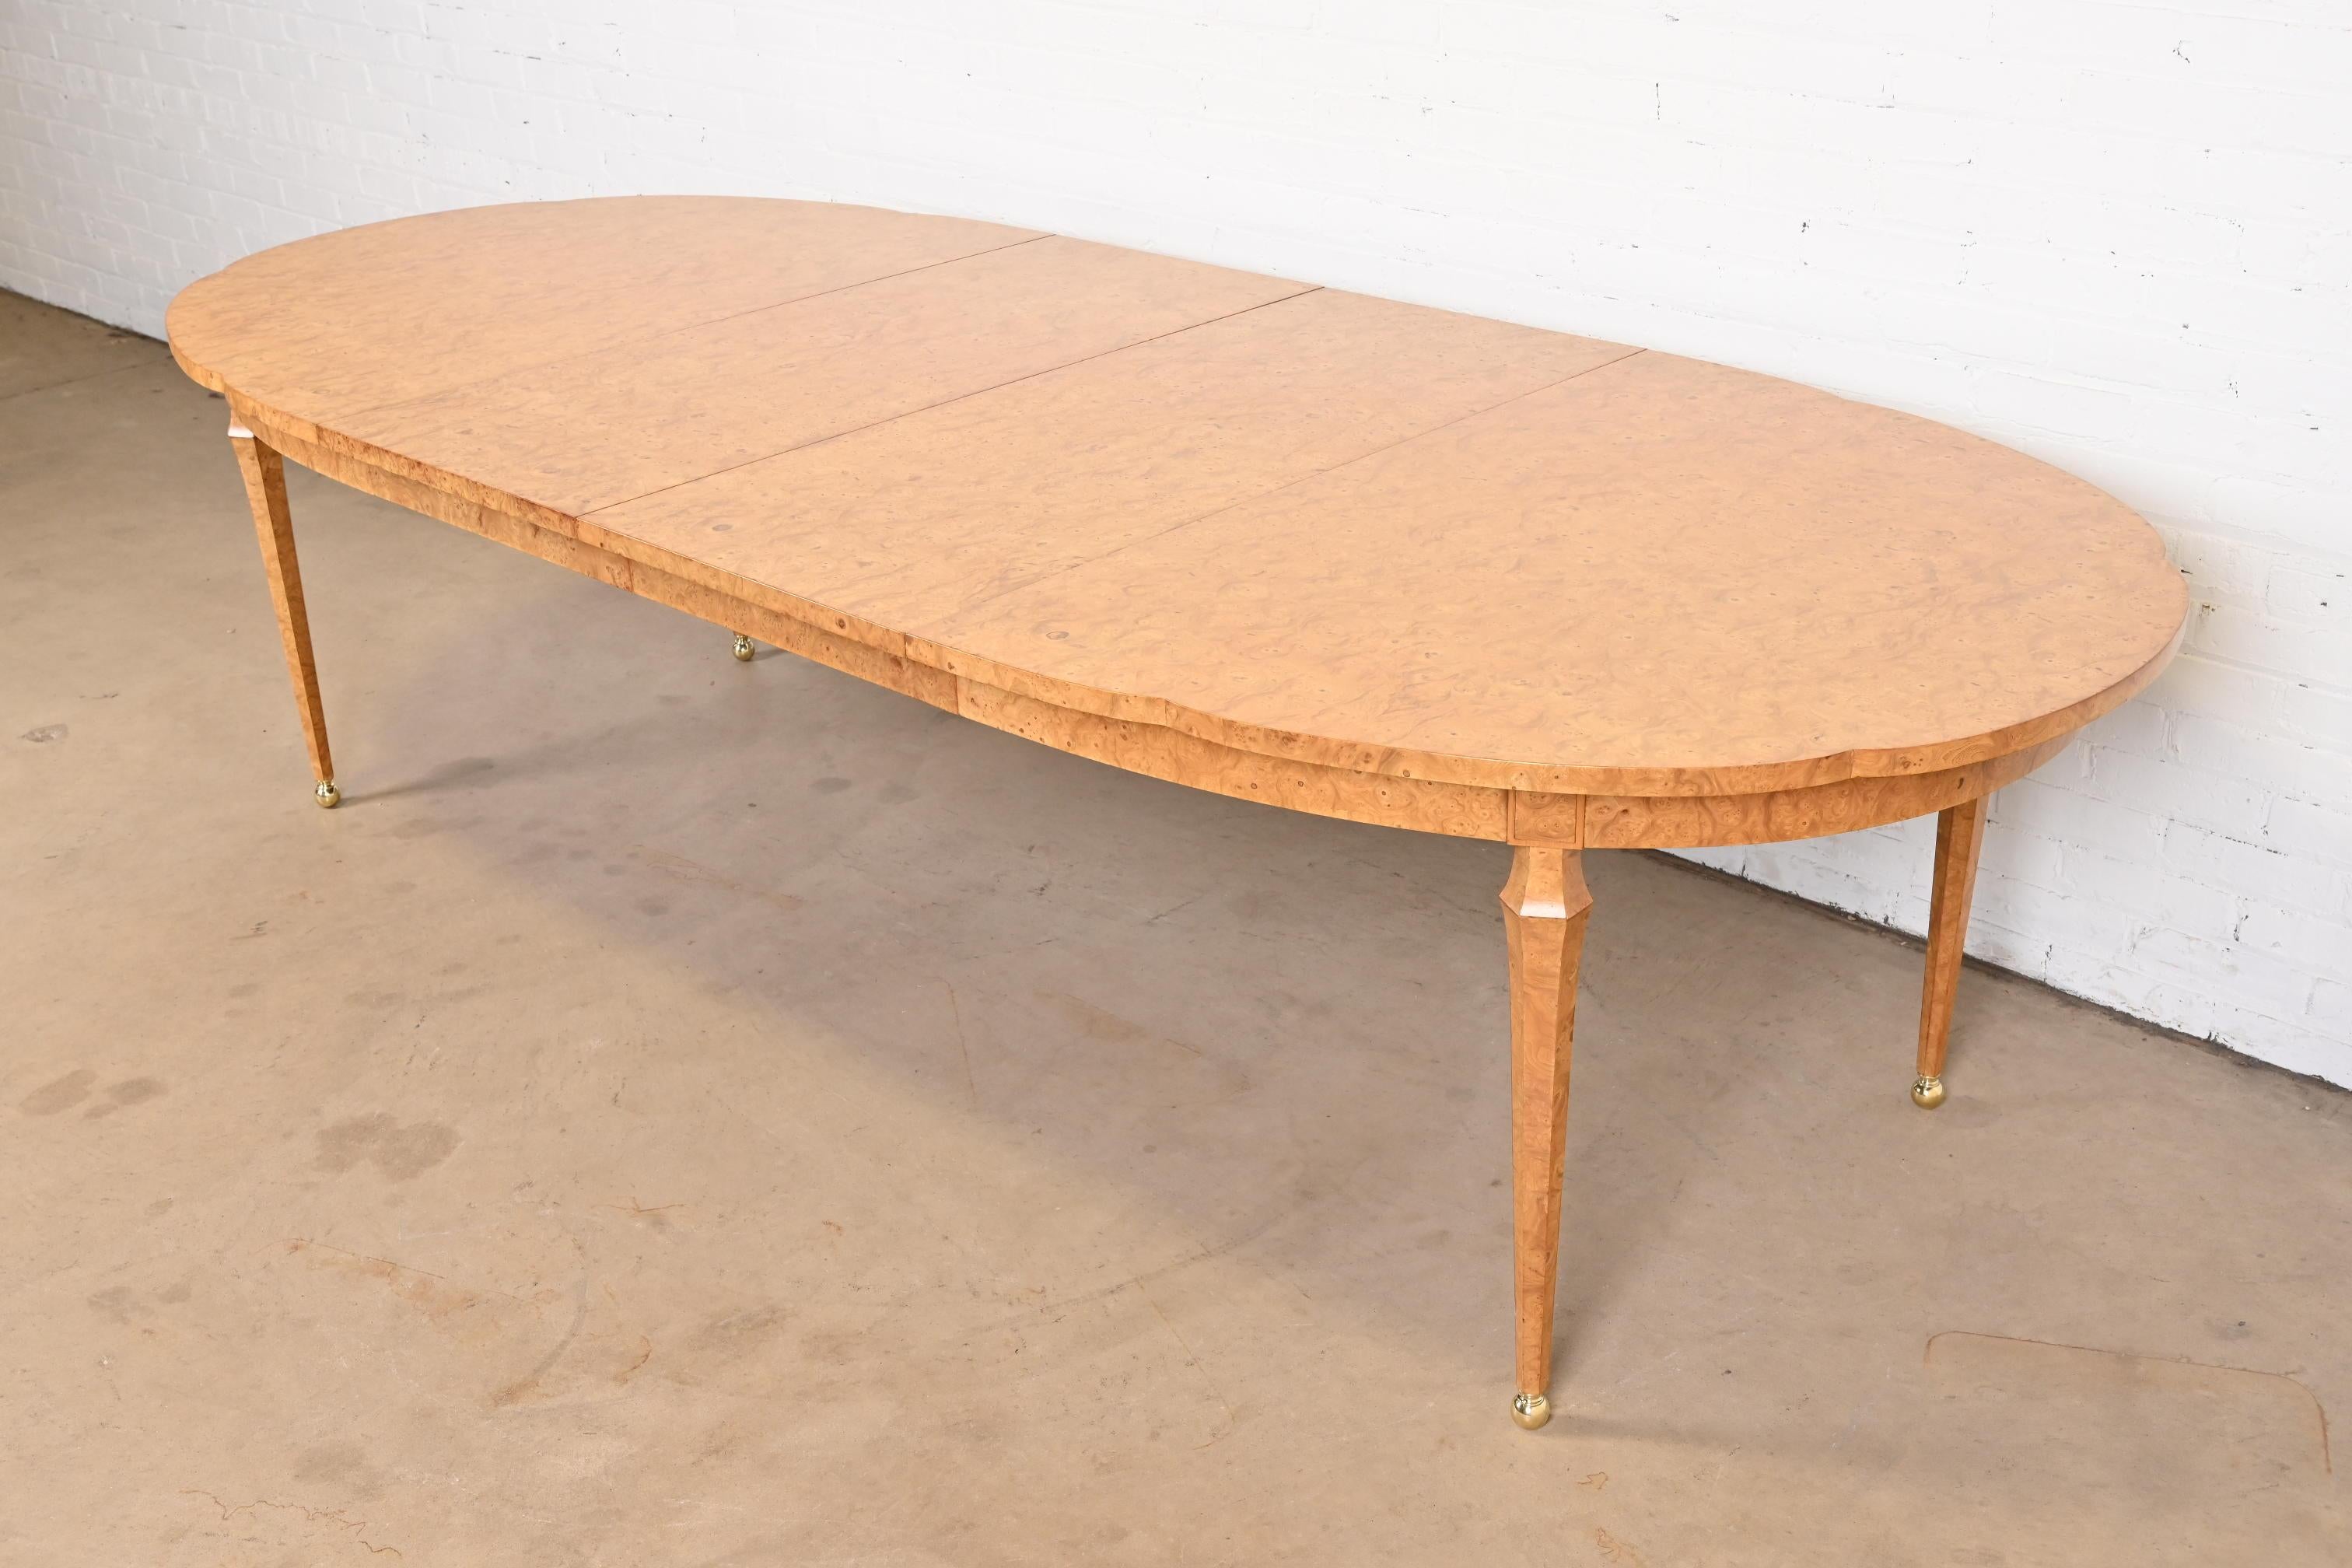 American Mastercraft Midcentury Hollywood Regency Burl Wood Dining Table, Refinished For Sale